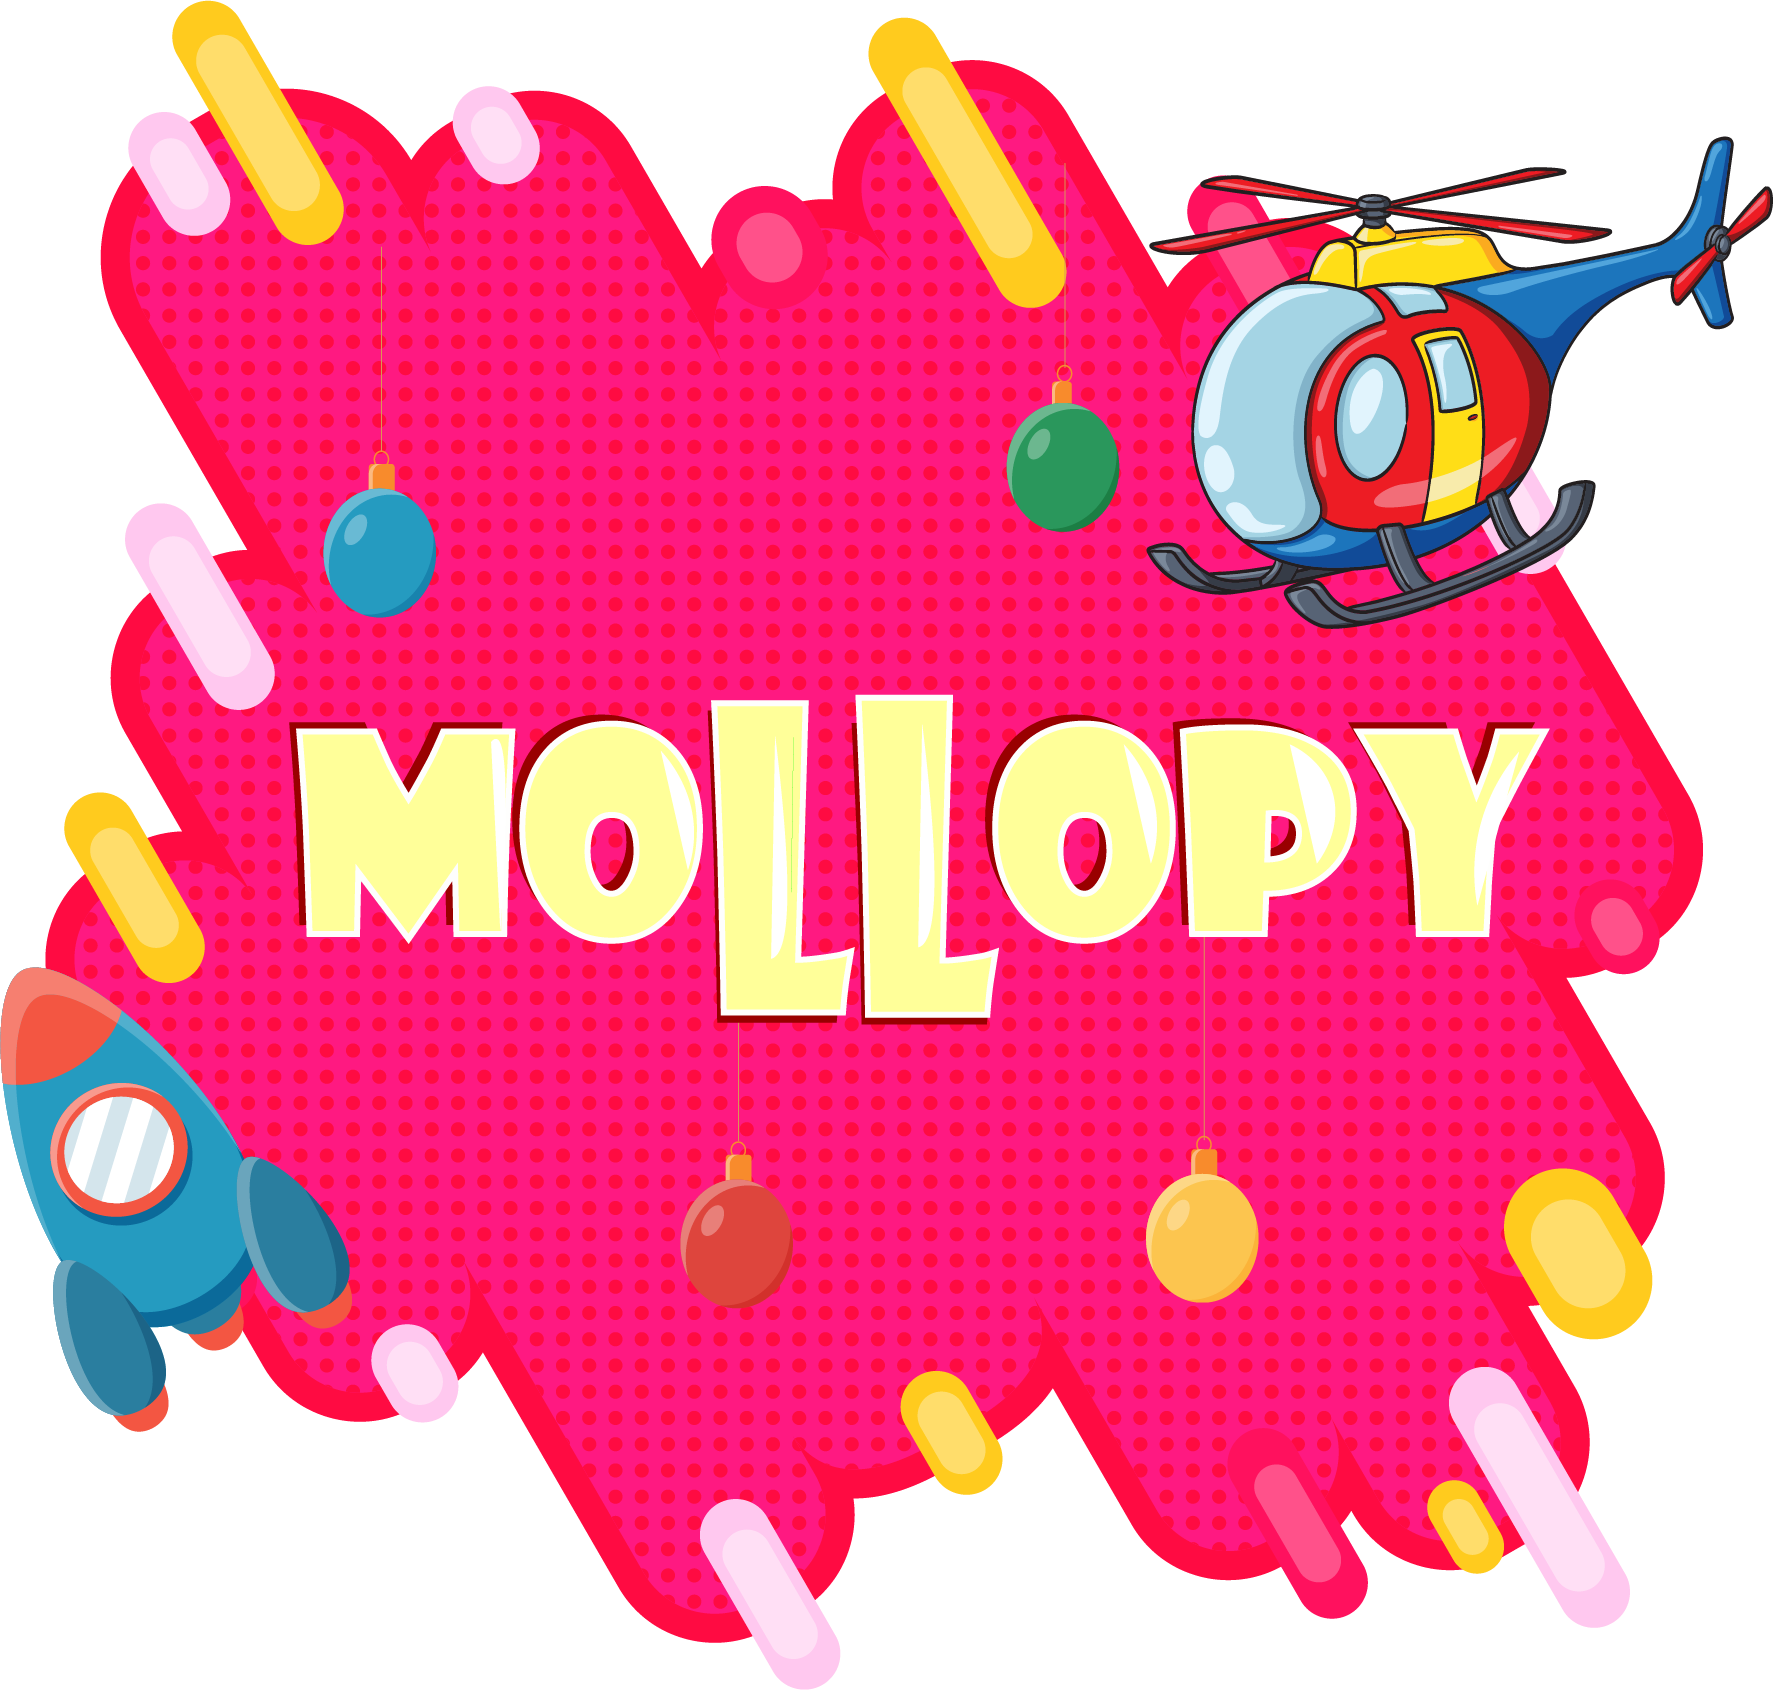 Mollopy Channel for Kids